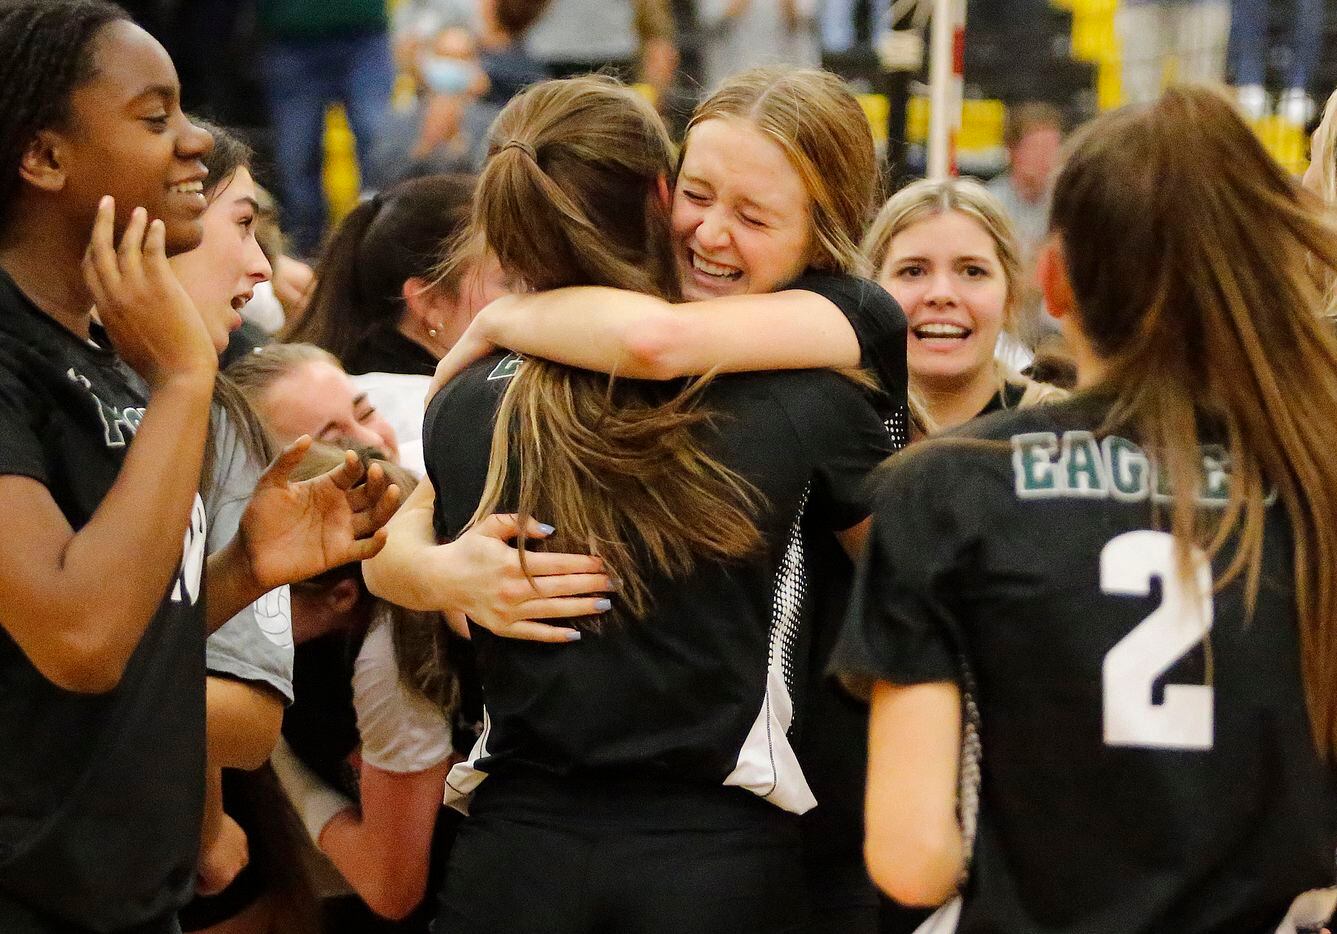 Prosper High School middle blocker Sydney Thornton (5) embraces Prosper High School setter Callie Kieffer (1) after they won the first round Class 6A playoff match against Flower Mound High School at The Colony High School on Tuesday, November 2, 2021. (Stewart F. House/Special Contributor)